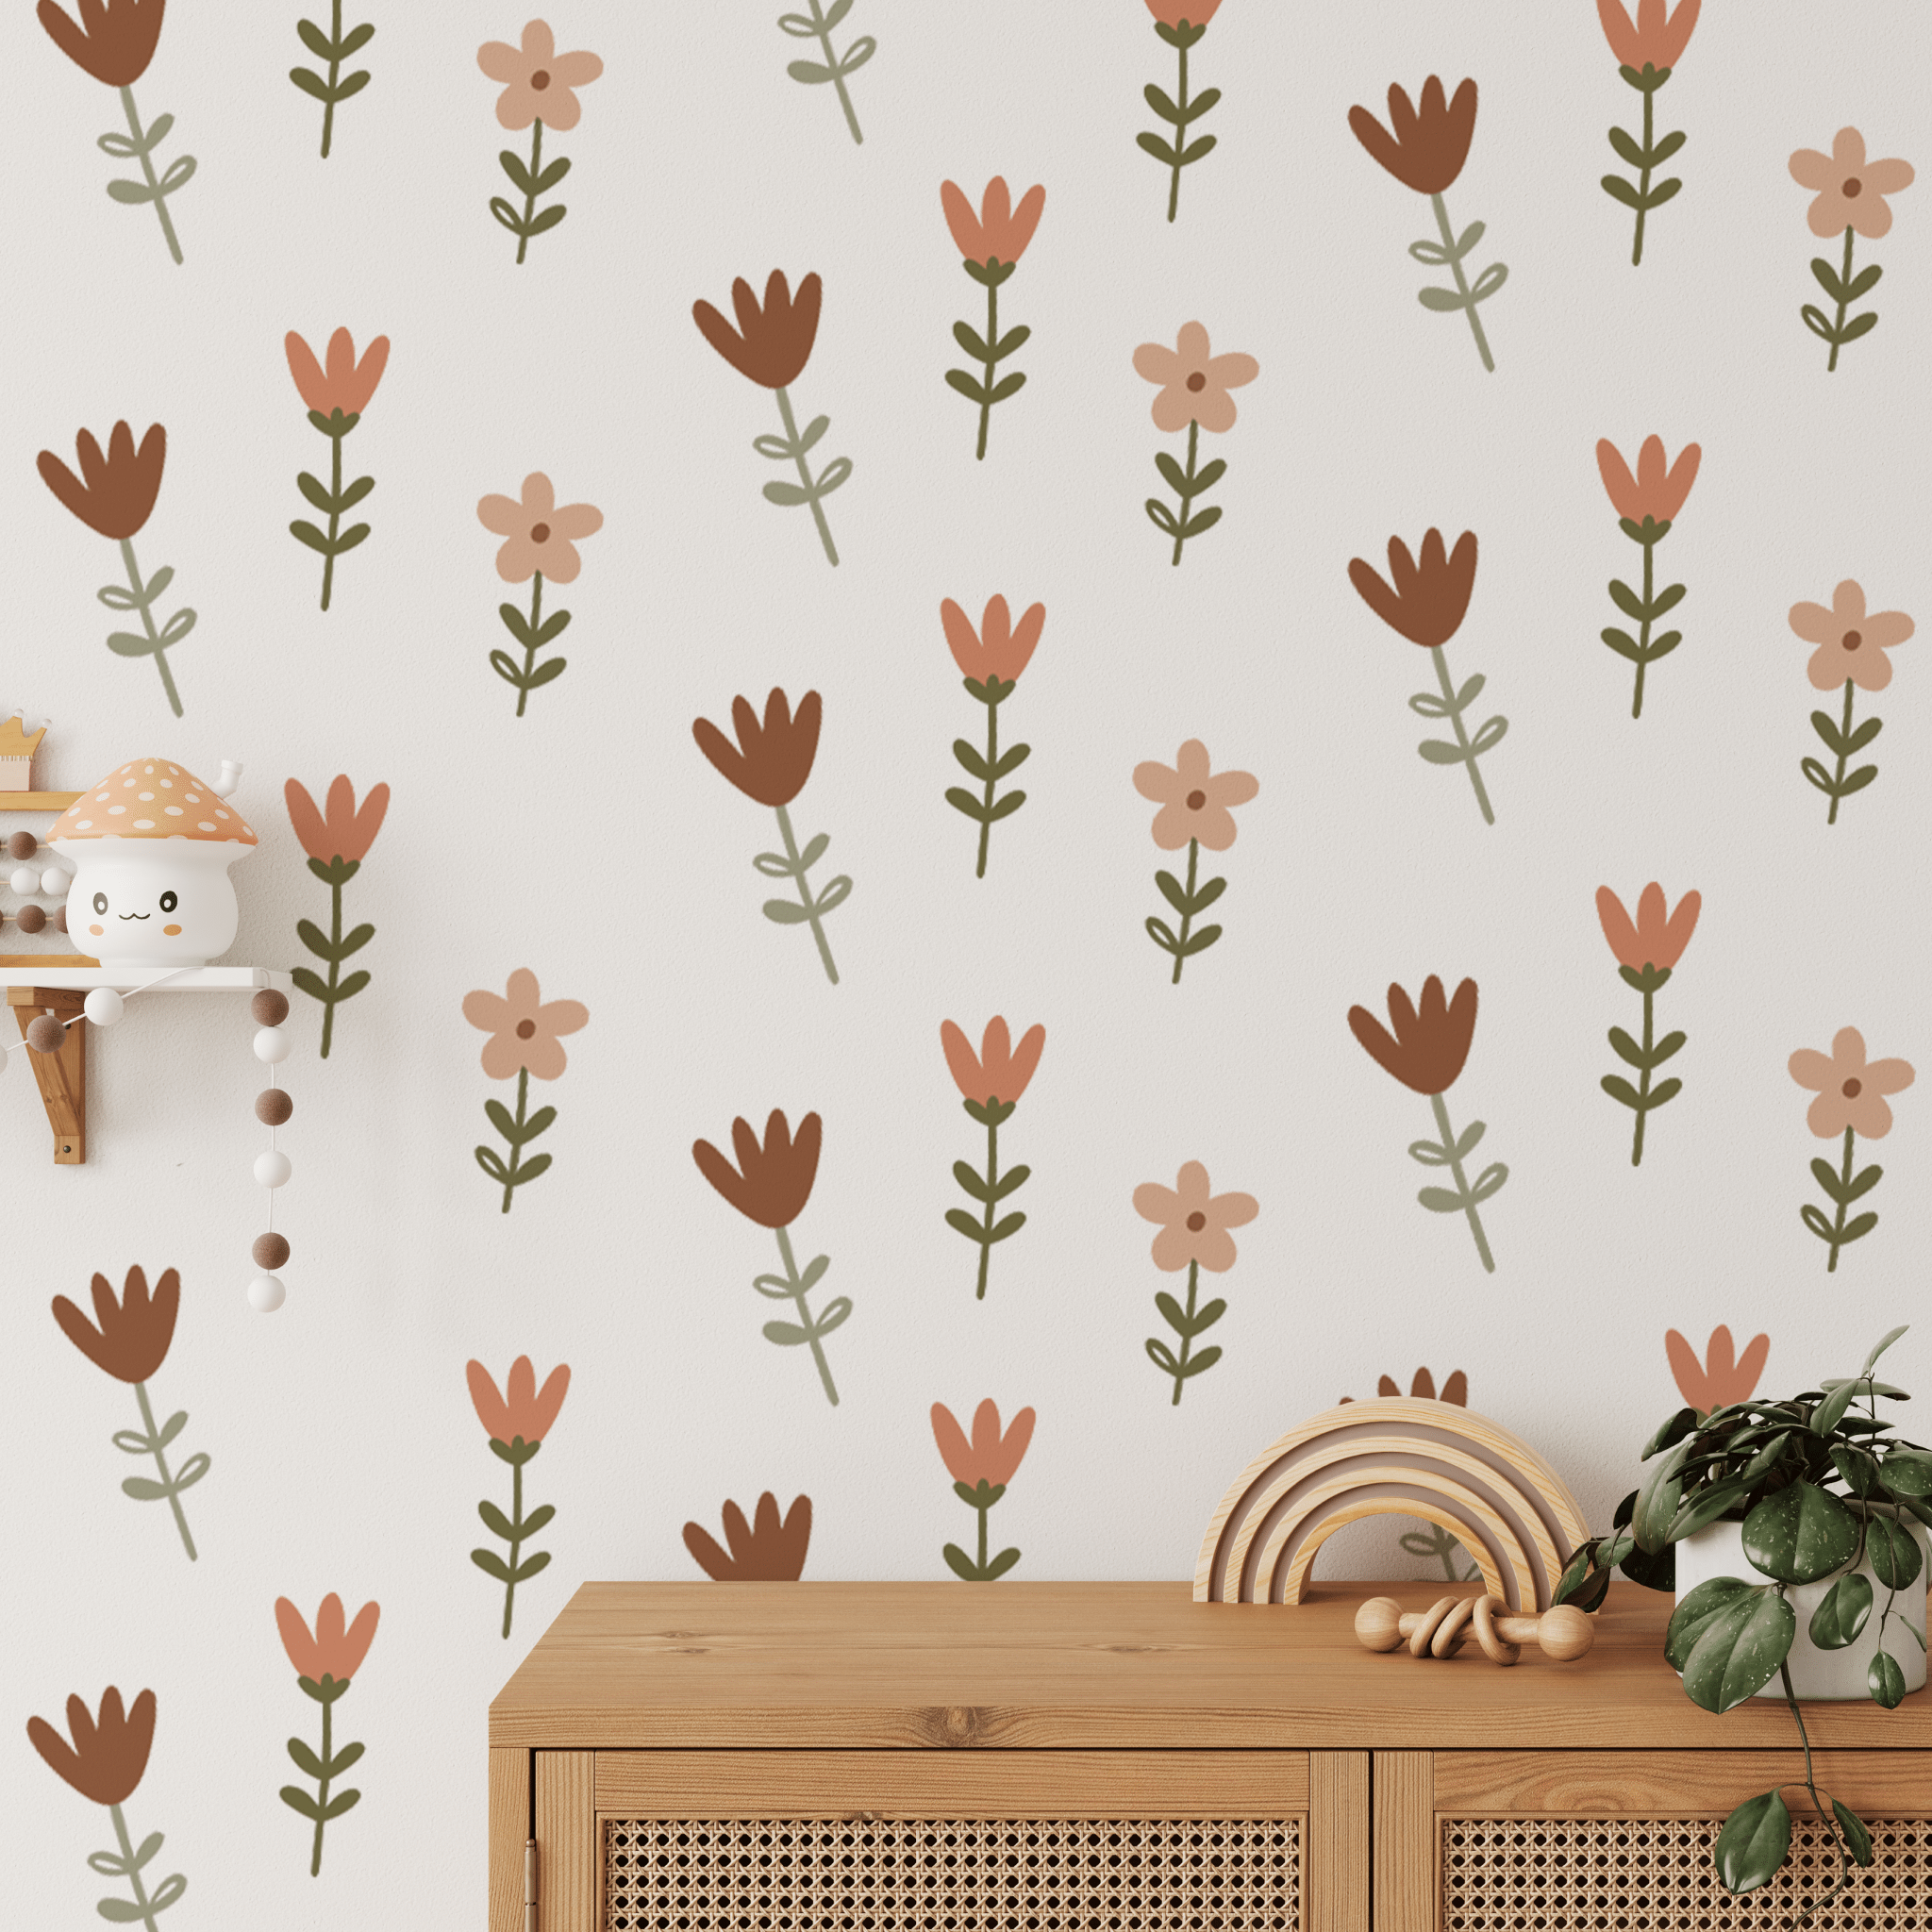 Wildflower Meadow Fabric Wall Decals, Boho Floral Decals for Girls Nursery,  Flower Wall Stickers, Boho Nursery Decals, Floral Decals 